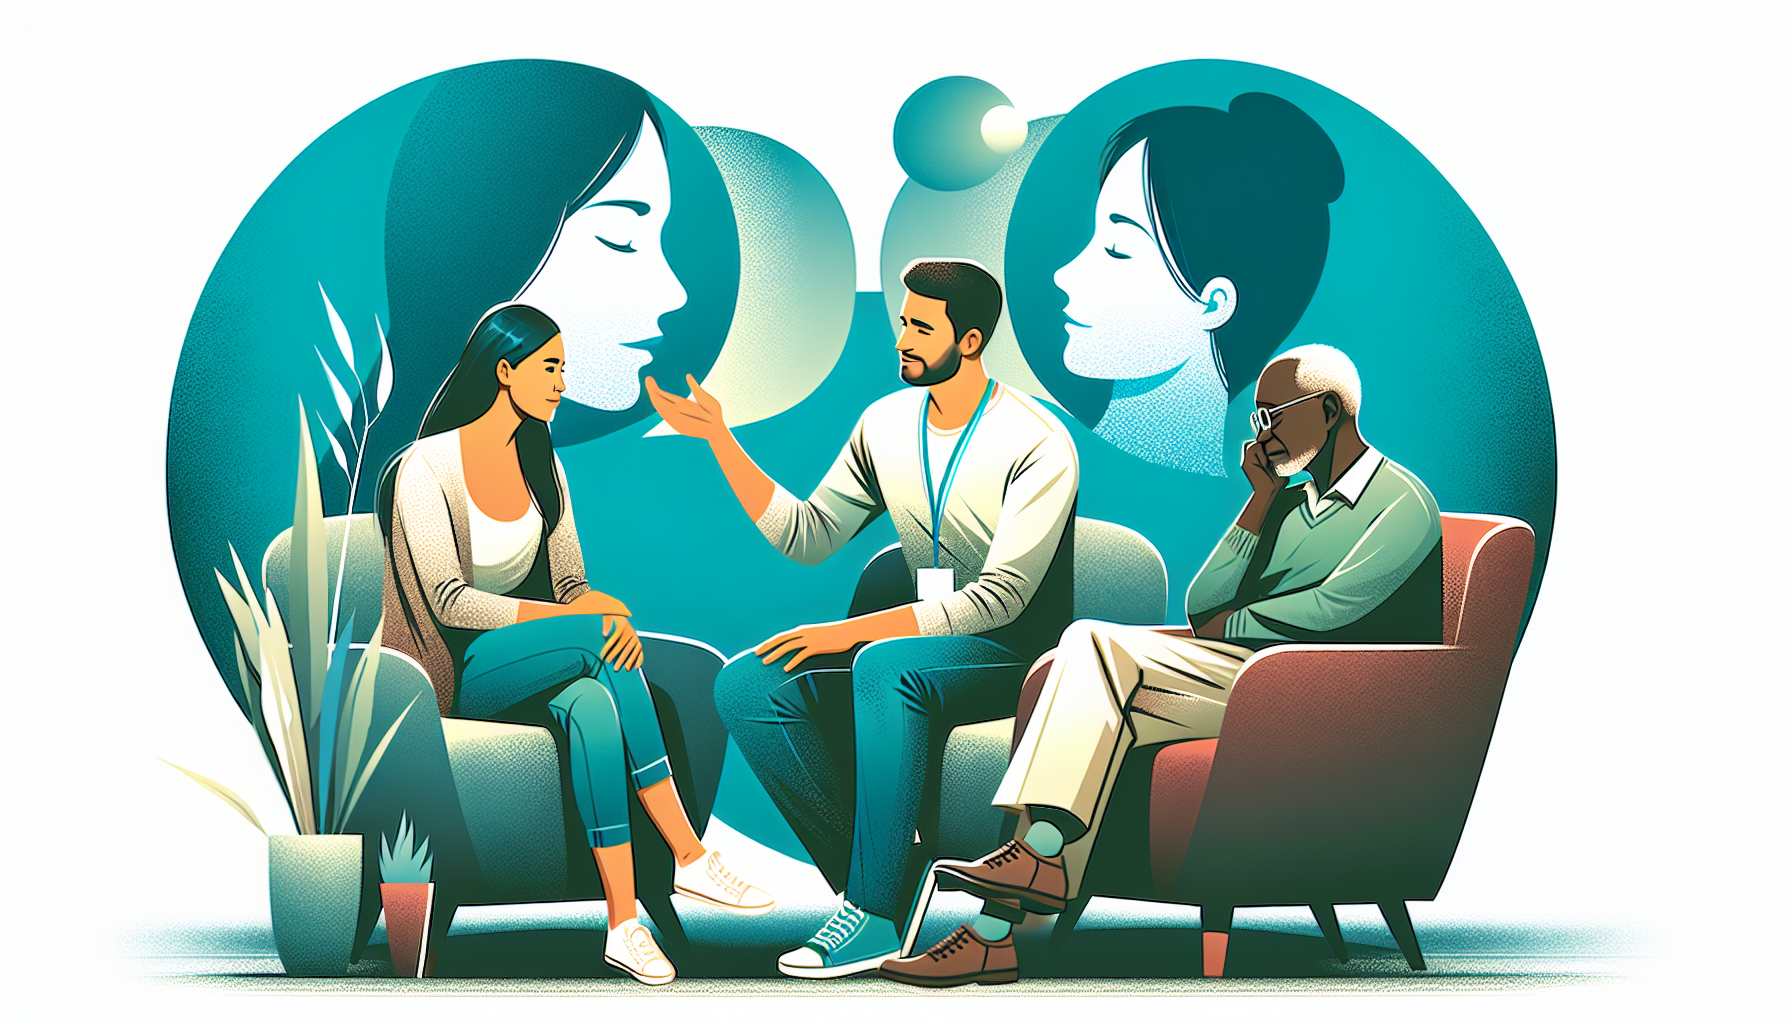 A couple and an individual engaging in therapy sessions to address career-related concerns. Bay Area CBT Center offers tailored therapy sessions for couples and individuals.